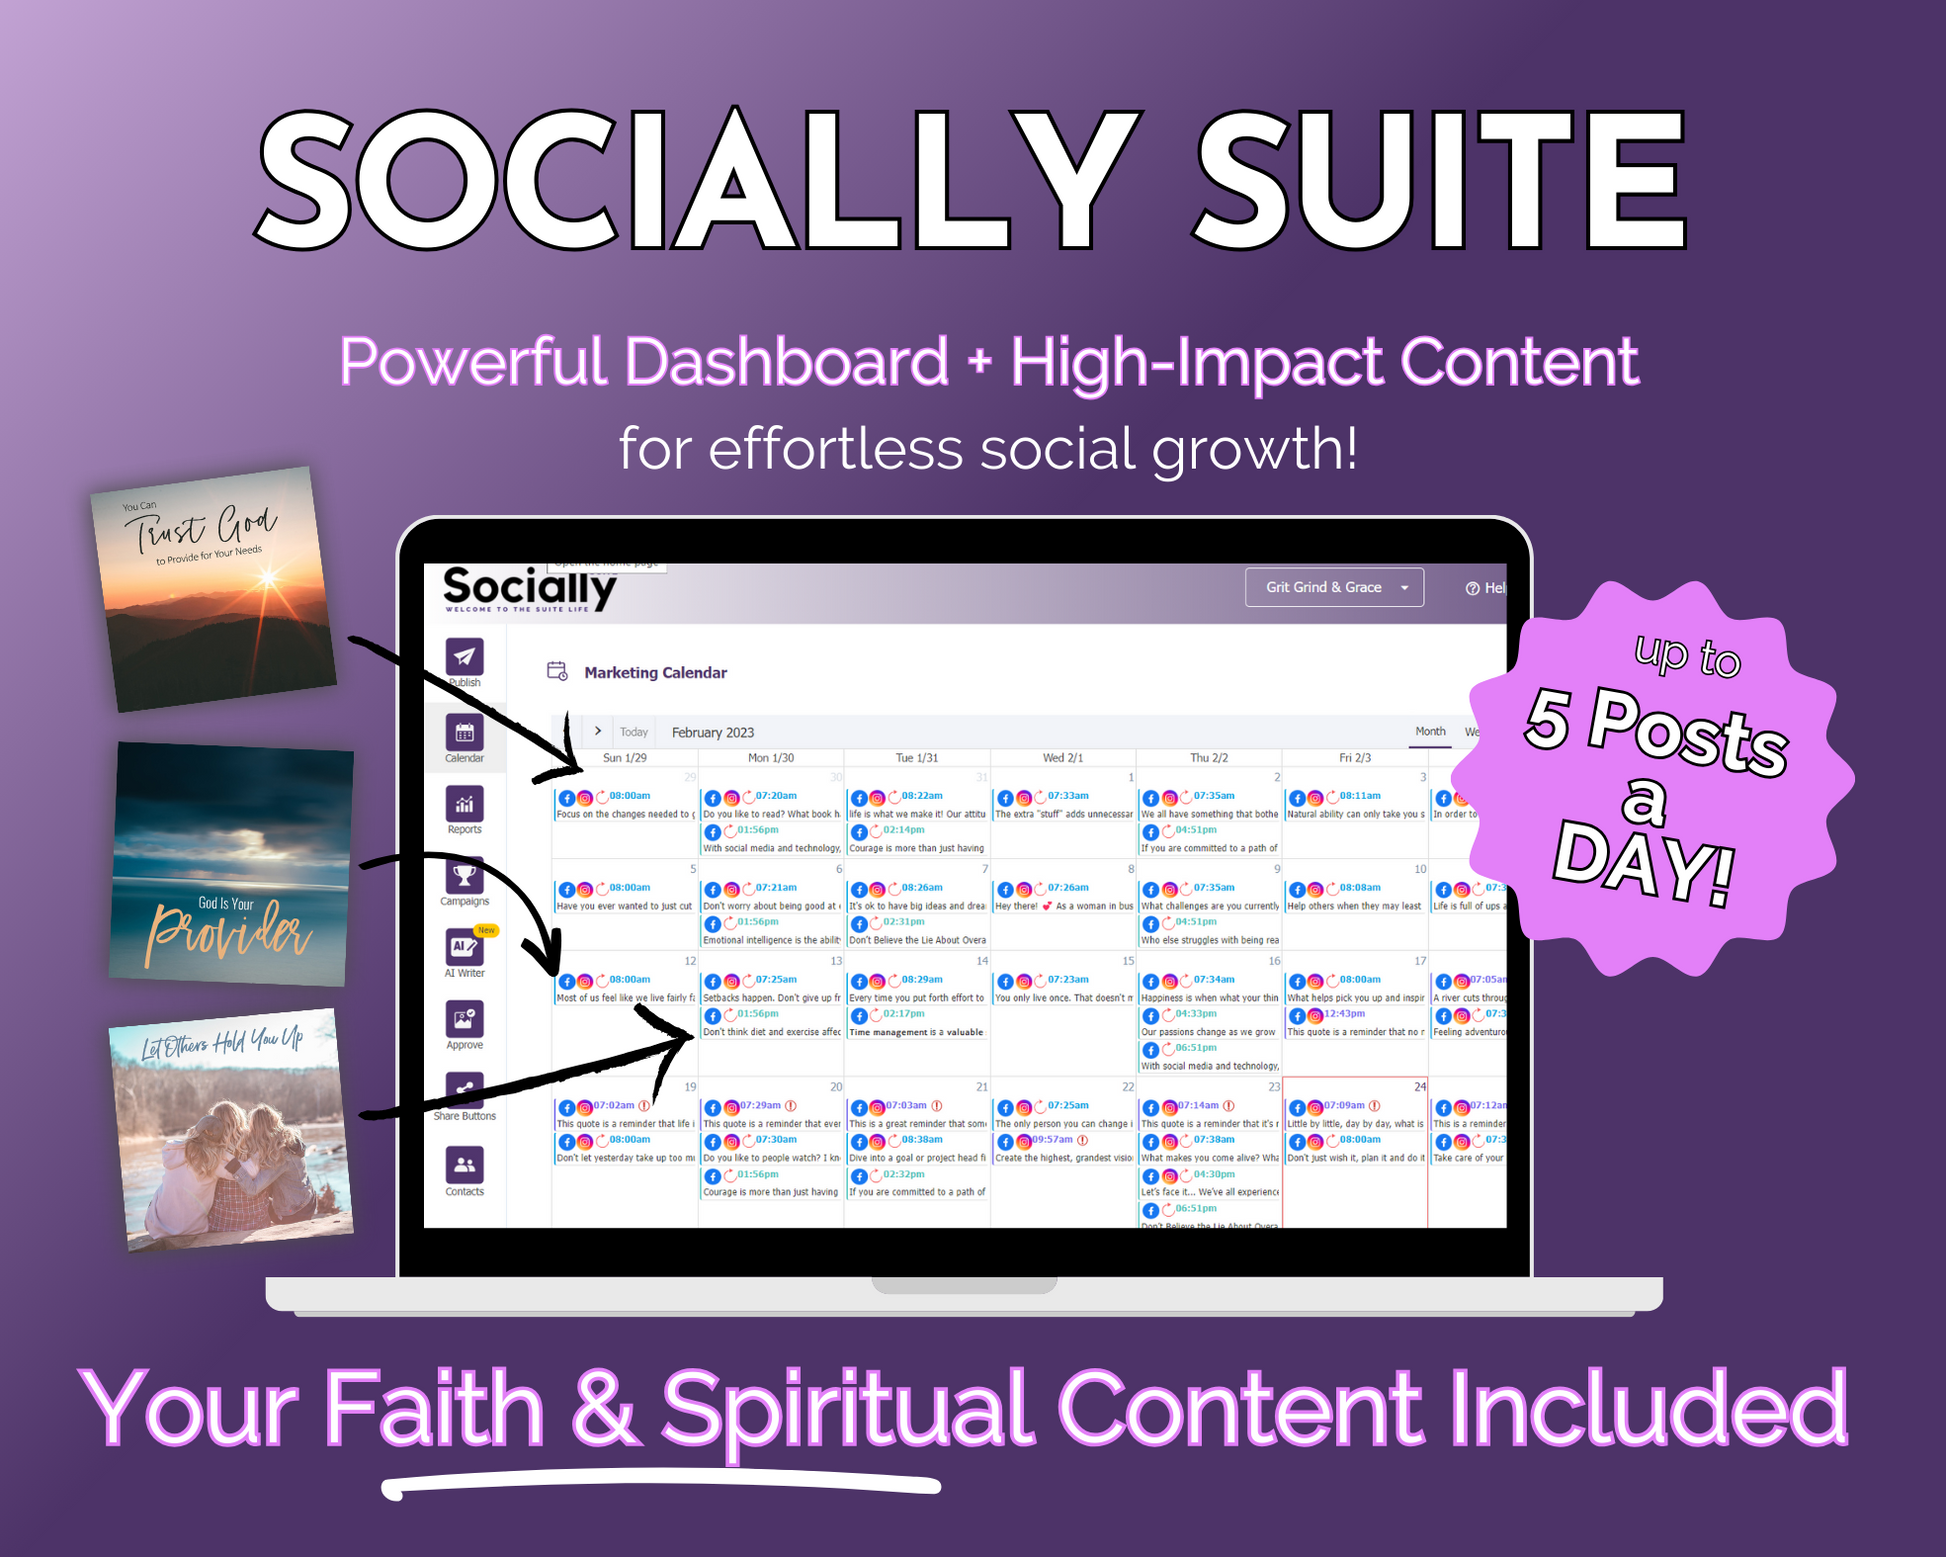 Get Socially Inclined's Socially Suite Membership is a powerful dashboard that allows users to efficiently manage their social media marketing efforts. With its high content capabilities, it empowers businesses to effectively curate and distribute content across various platforms.